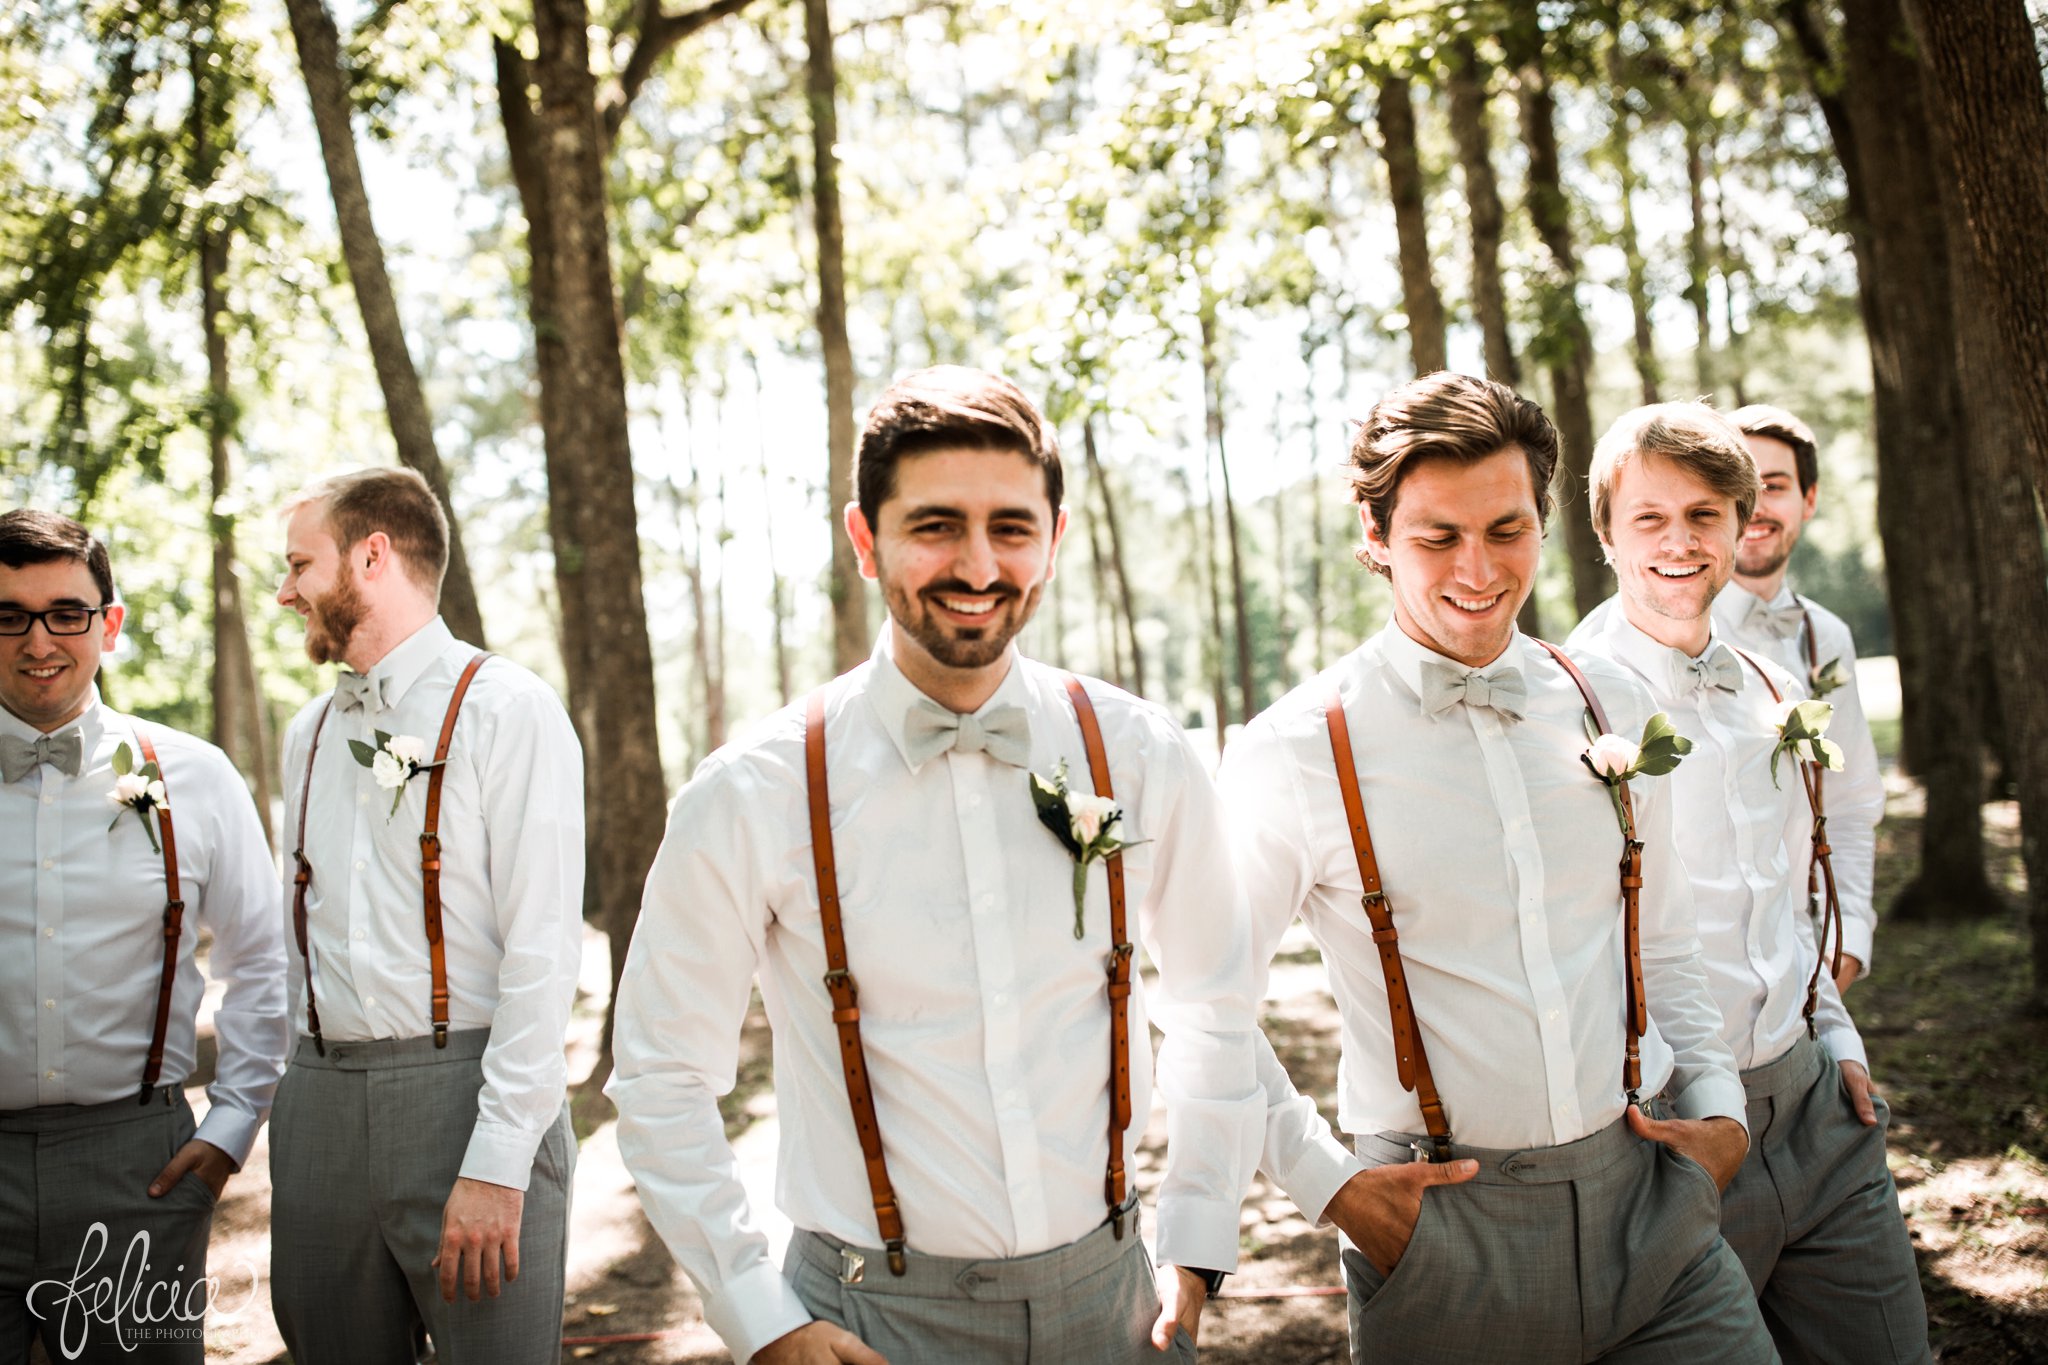 images by feliciathephotographer.com | destination wedding | the makey house | dave gibson coordinator | travel photographer | Savannah, georgia | southern | portrait | groomsmen | game face | pre-ceremony | trees | forest | brown hipster shoes | suspenders | bow ties | green | laughter | walking 